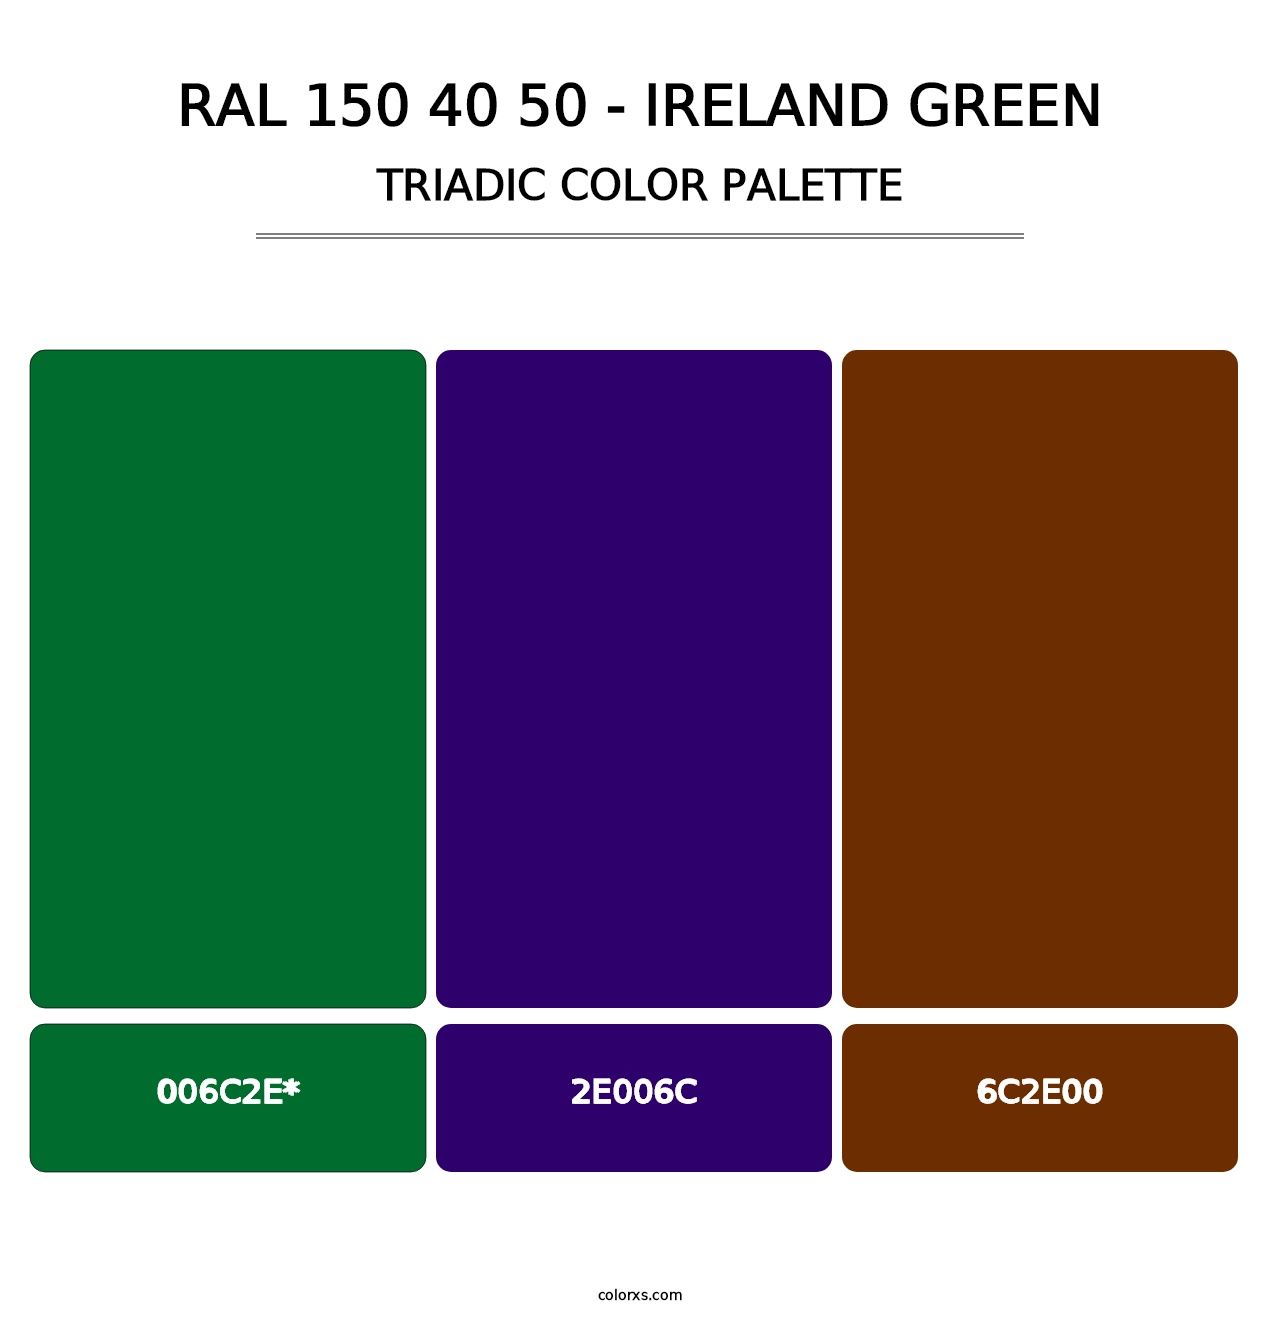 RAL 150 40 50 - Ireland Green - Triadic Color Palette